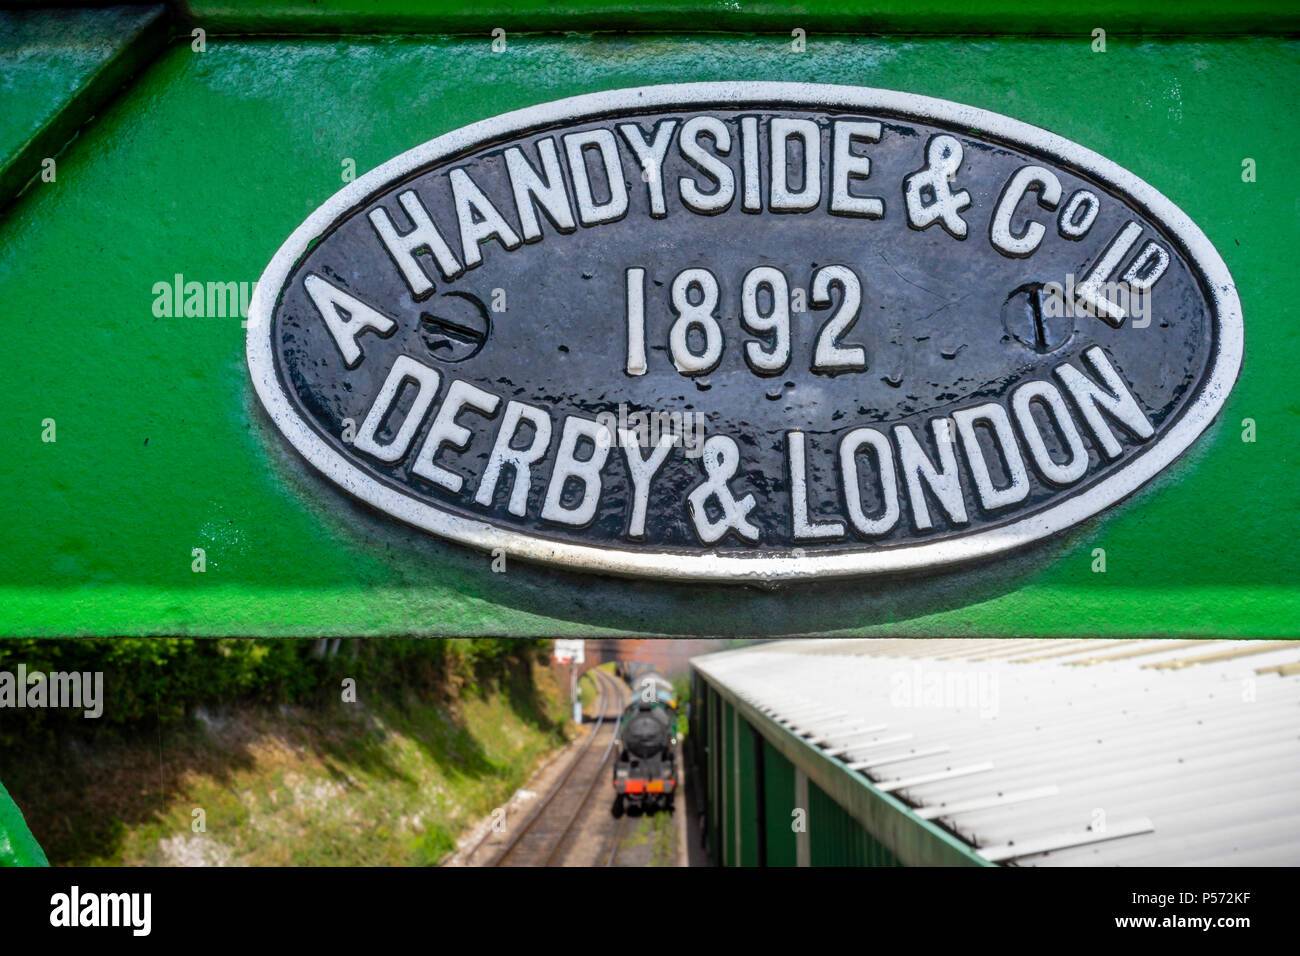 A Handyside & Co Ltd metal plaque at a railway bridge along the Watercress Line in Hampshire, England, UK Stock Photo